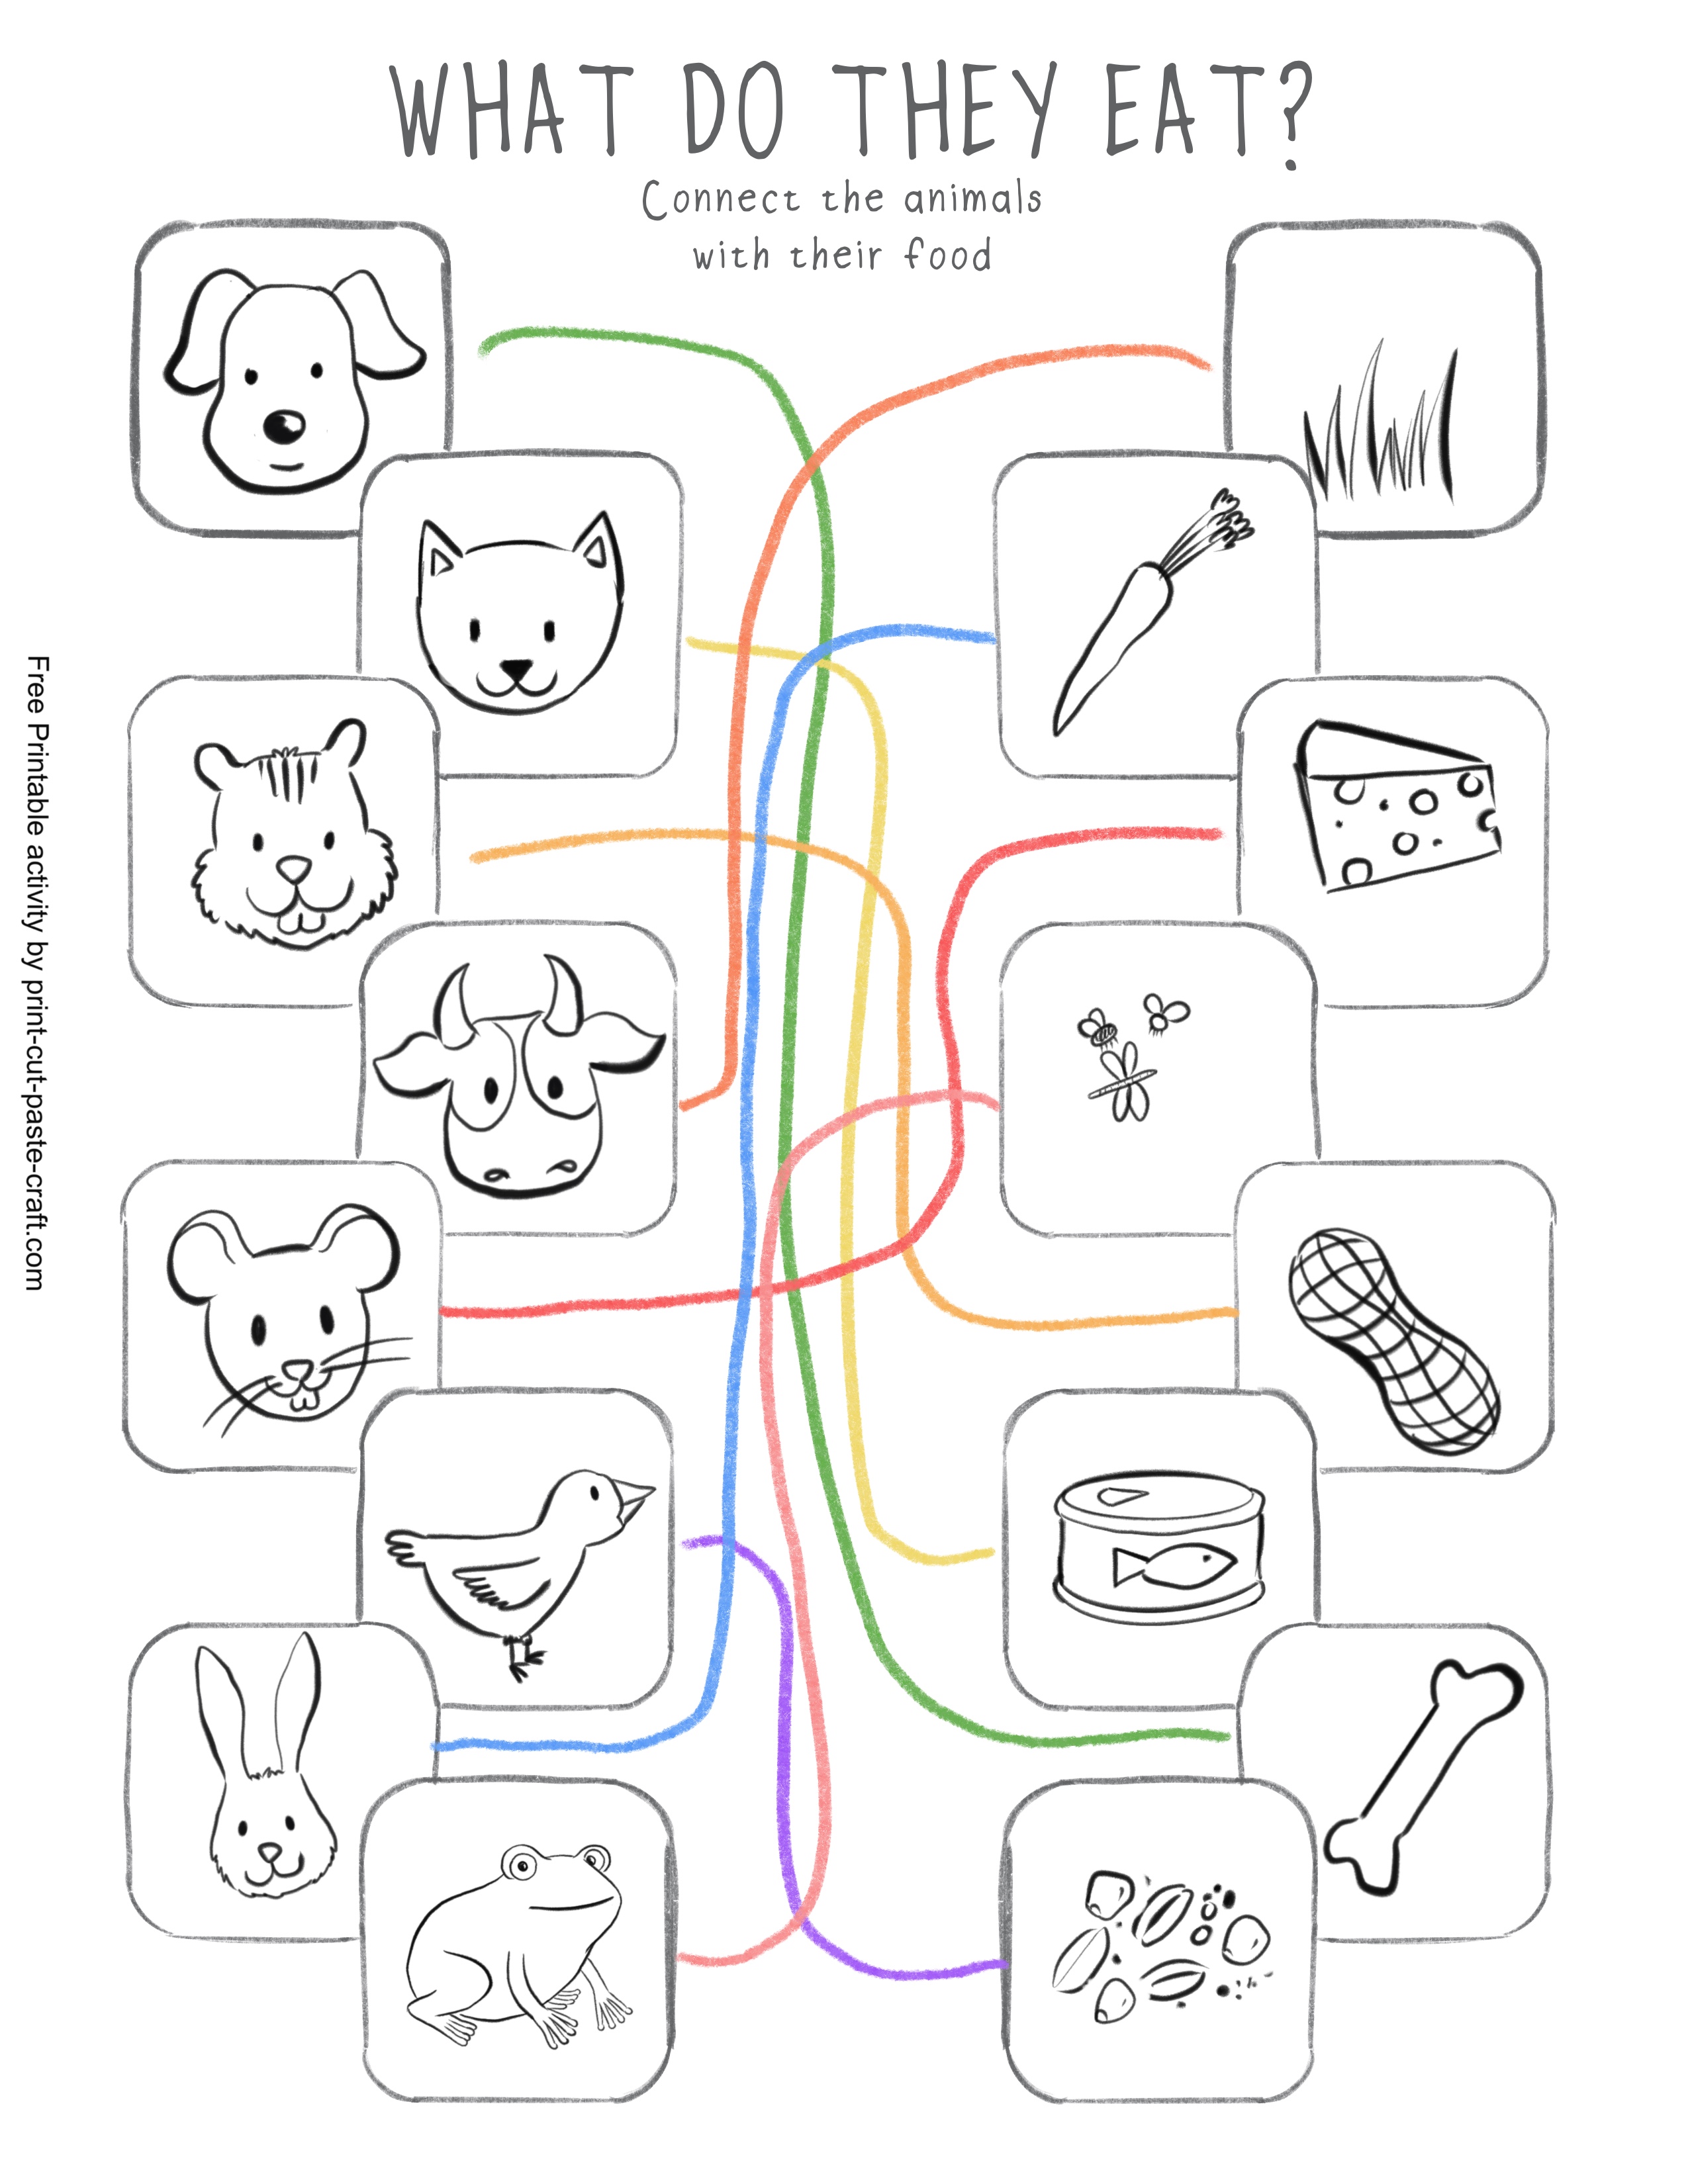 Feed the Animals Free Printable Activity/Worksheet